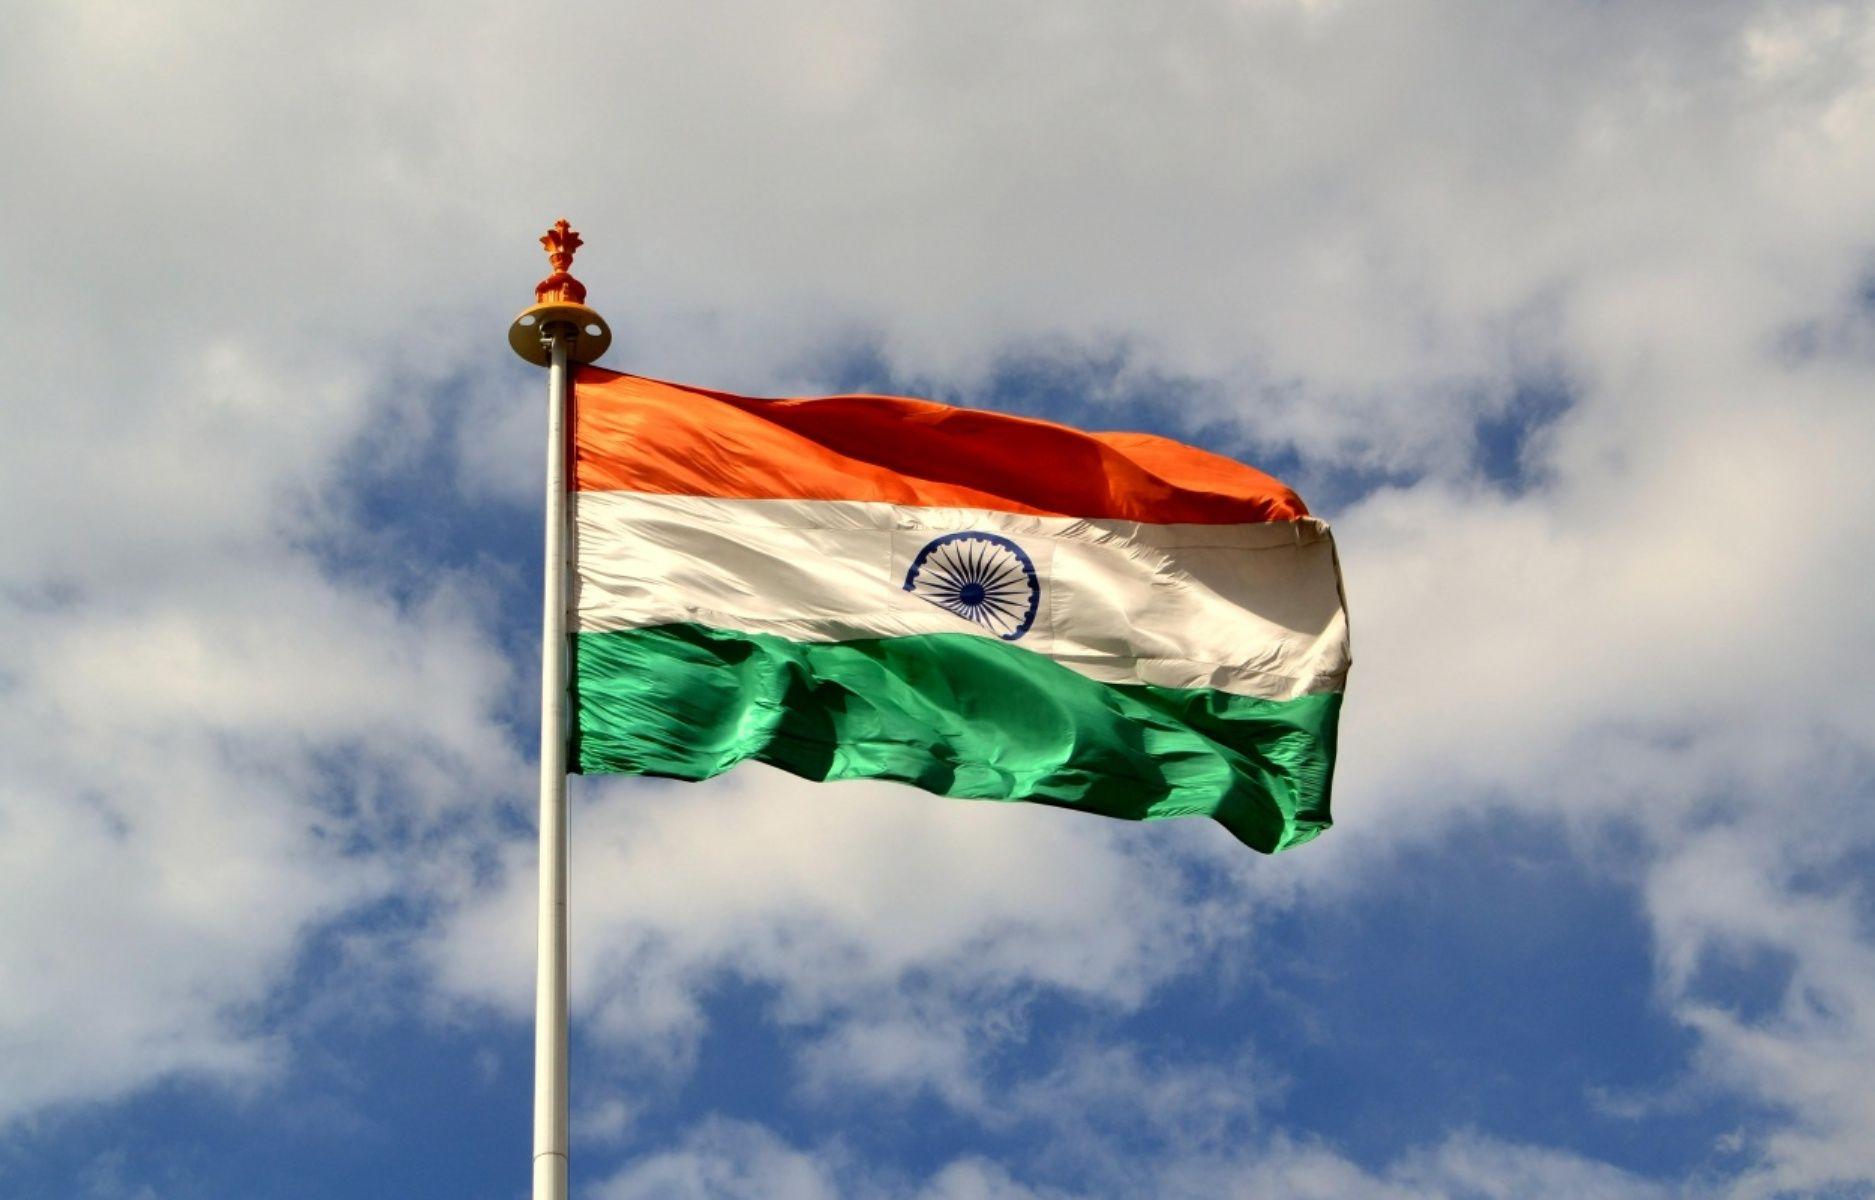 69th Republic Day 2018}* Indian Flag Wallpaper Image Free